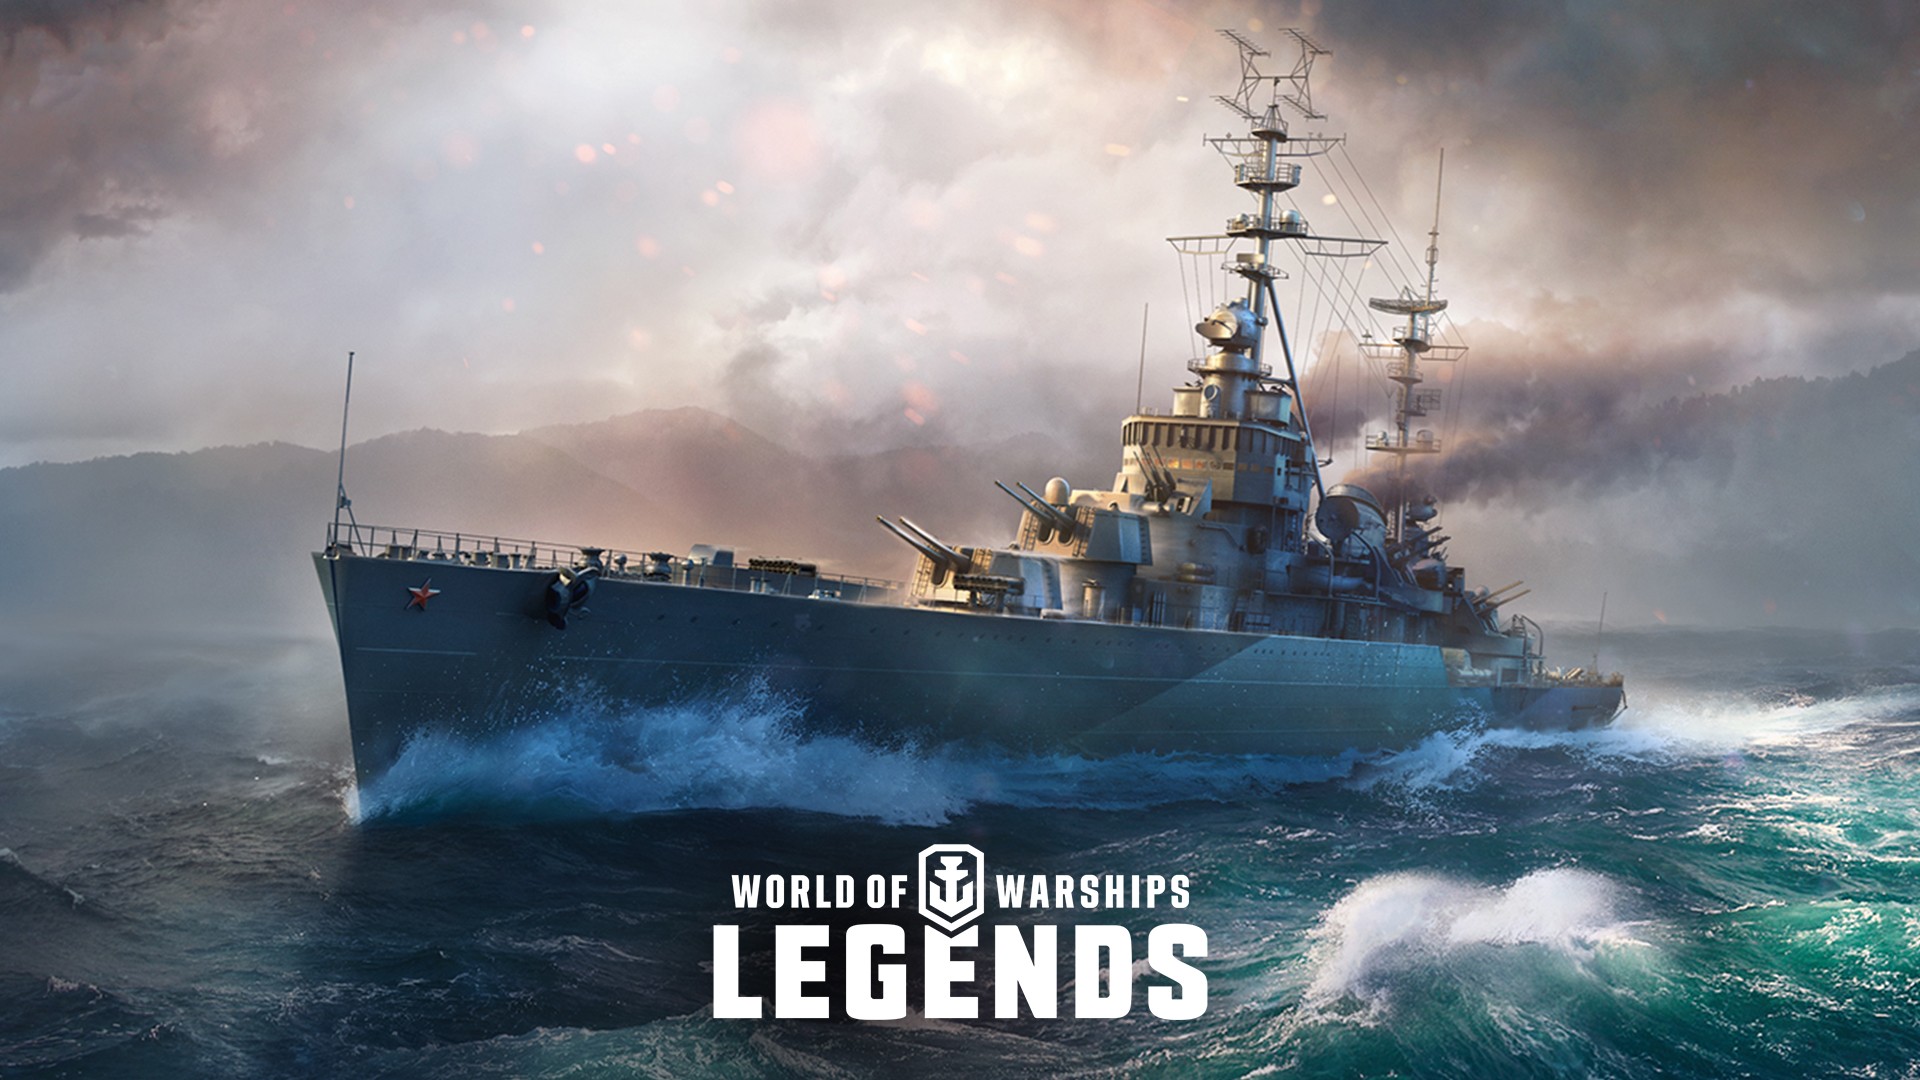 World of Warships: Legends October Is Getting Ready for Spooky Waves, New  Ships, and Arpeggio Collaboration